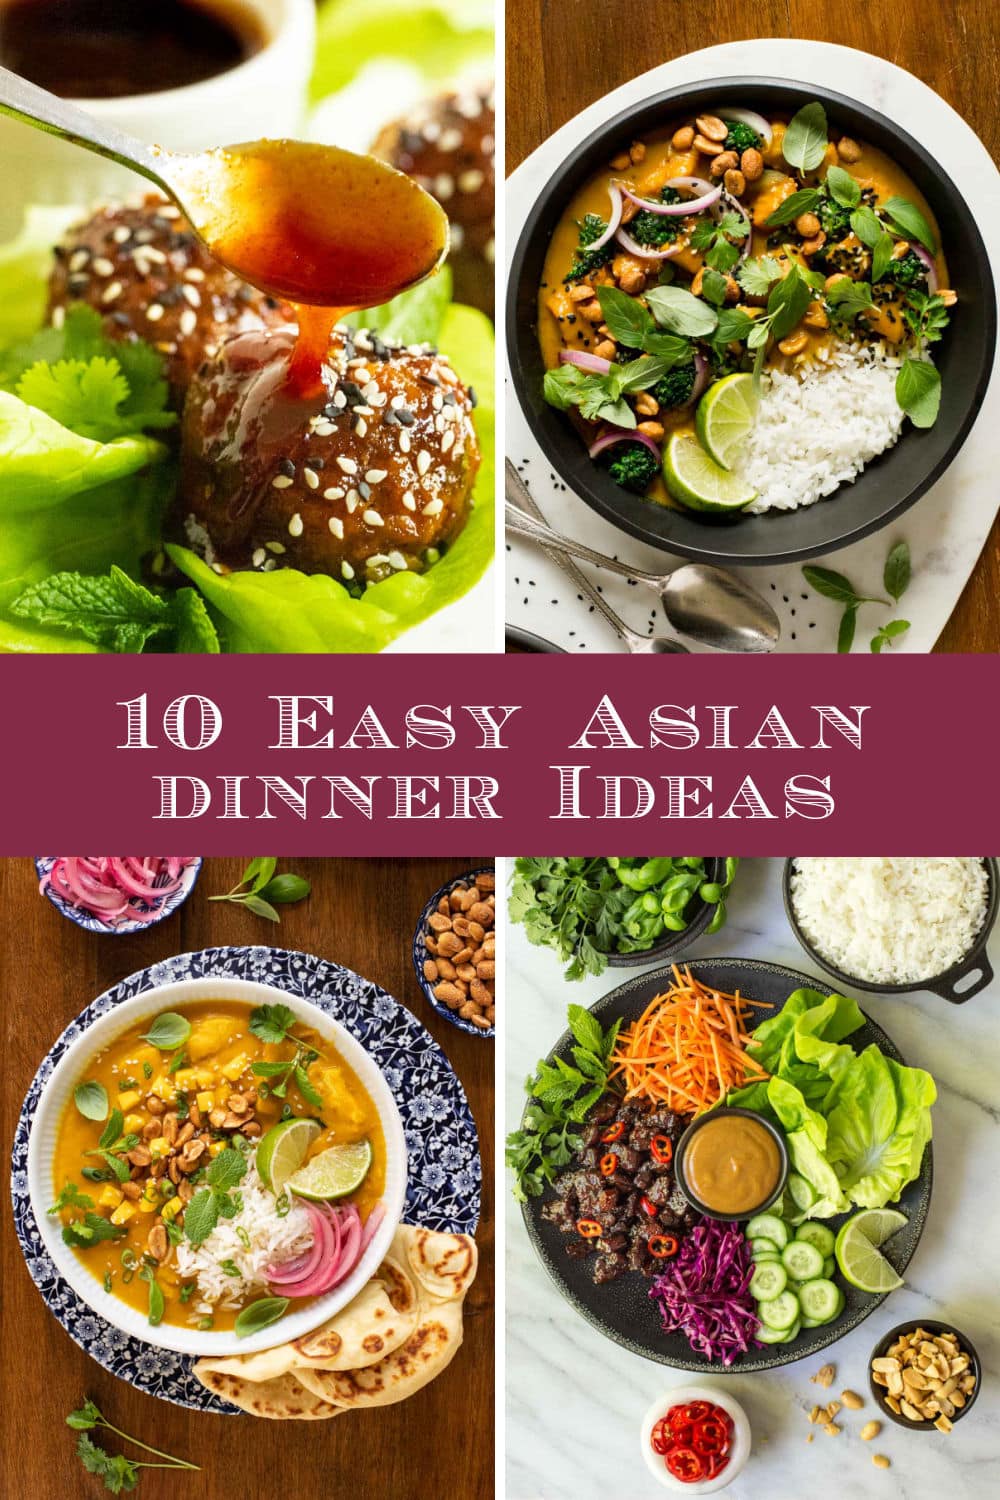 Asian for Dinner... Easy, Fresh, Bursting with Delicious Flavor!